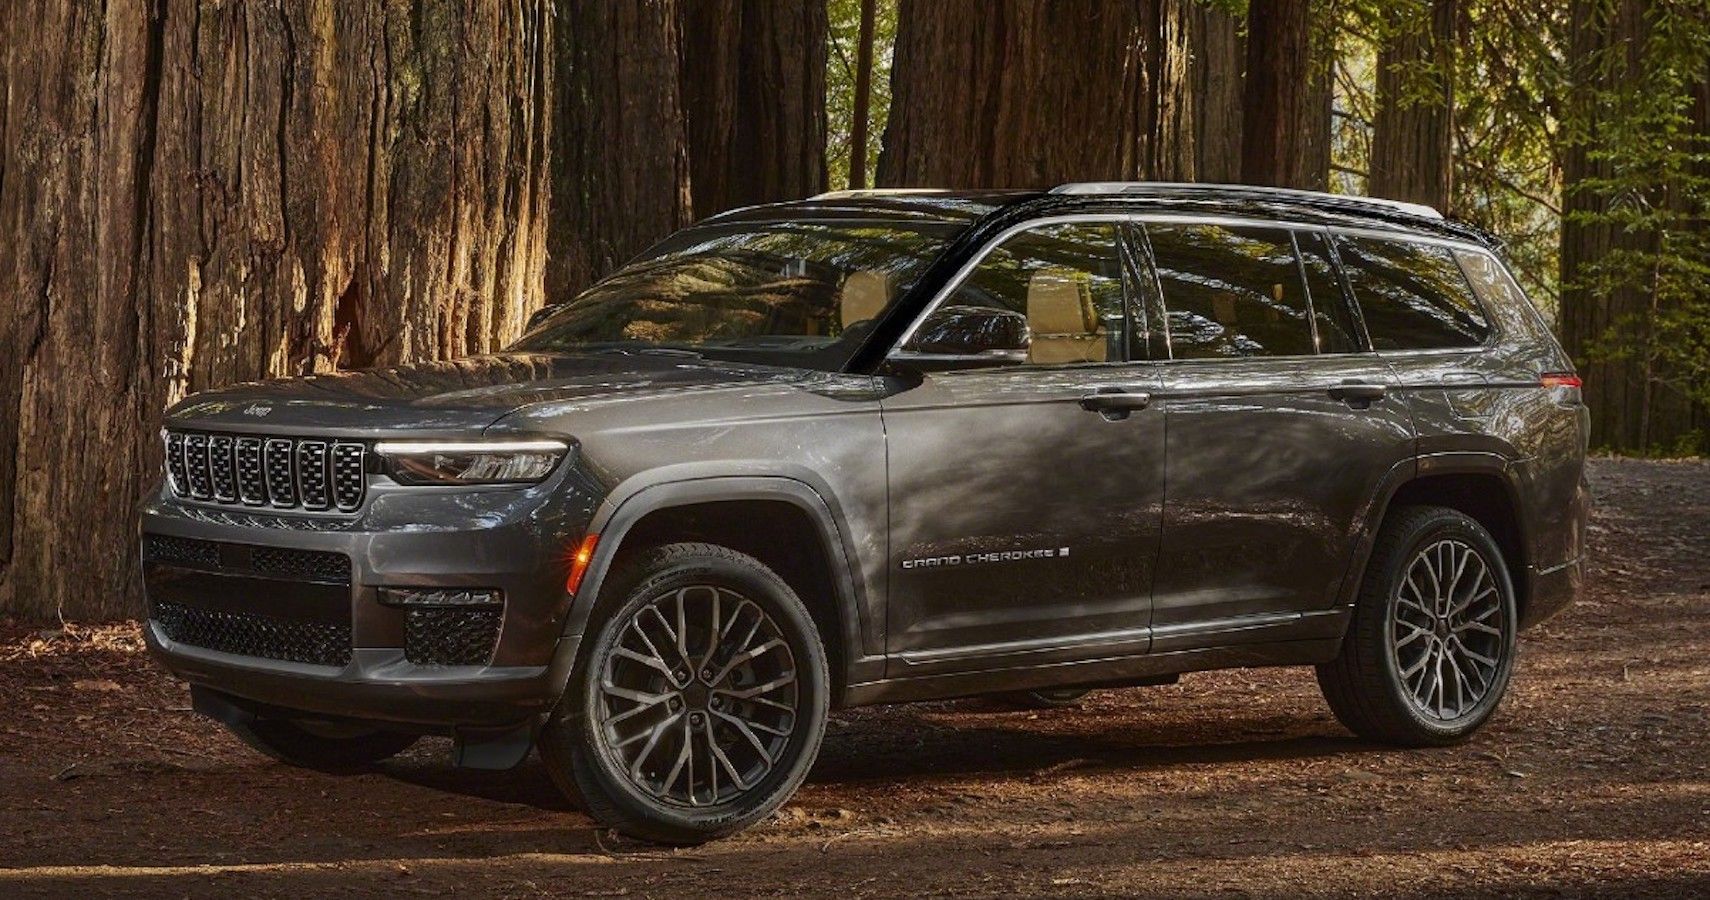 2021 Jeep Grand Cherokee L Offers 3Rows Of Luxury And Off